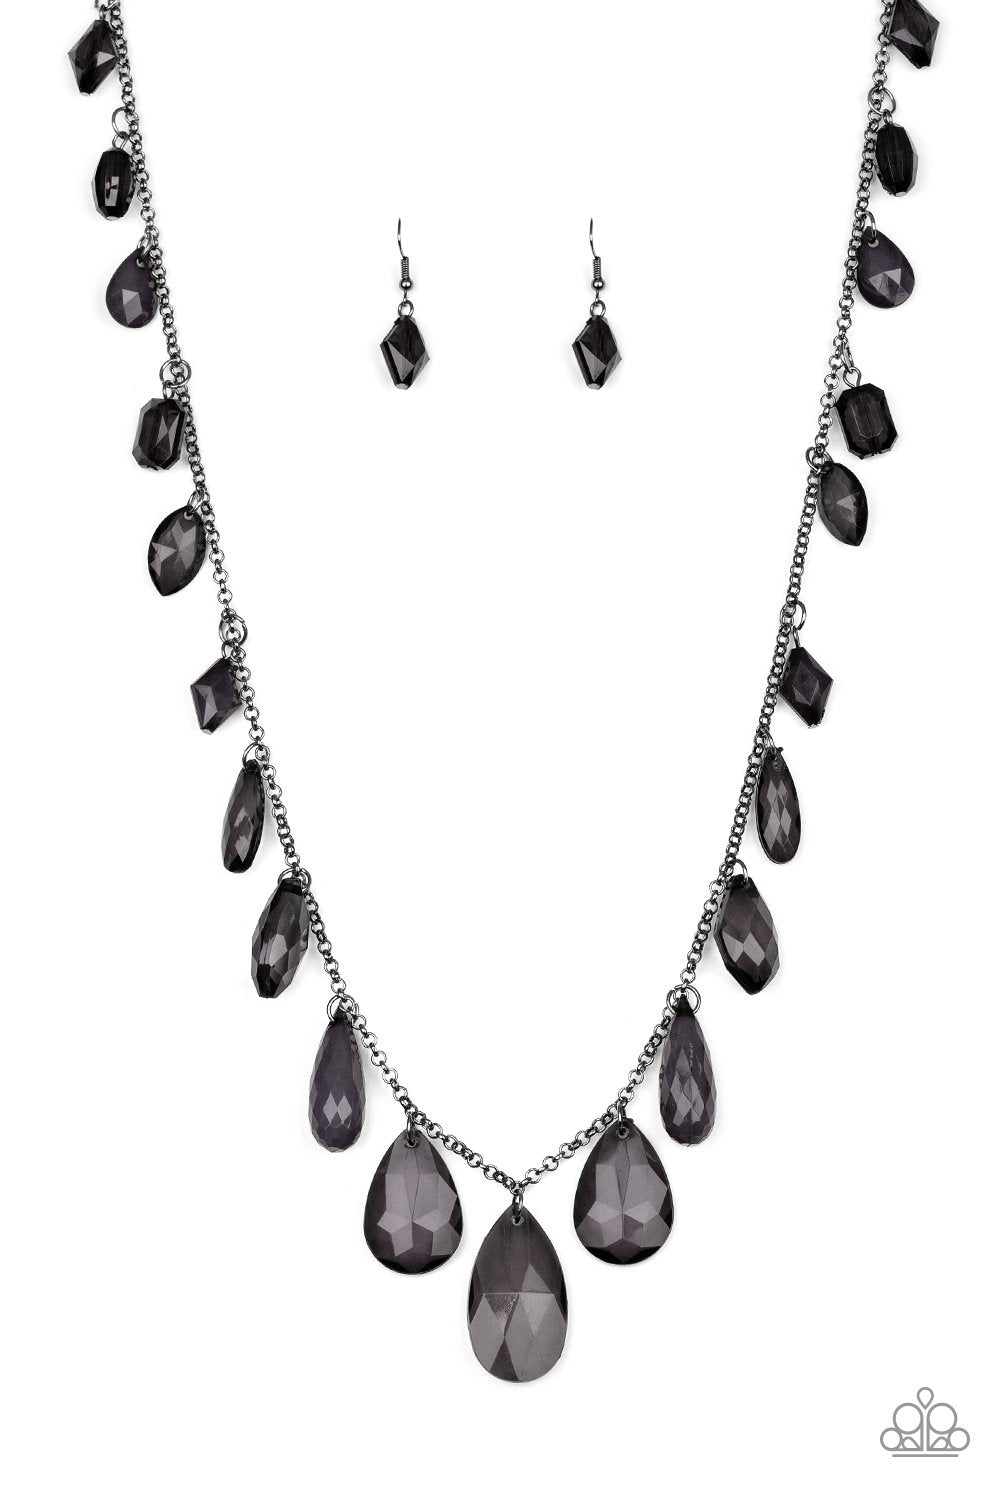 GLOW And Steady Wins The Race Black Necklace - Paparazzi Accessories-CarasShop.com - $5 Jewelry by Cara Jewels